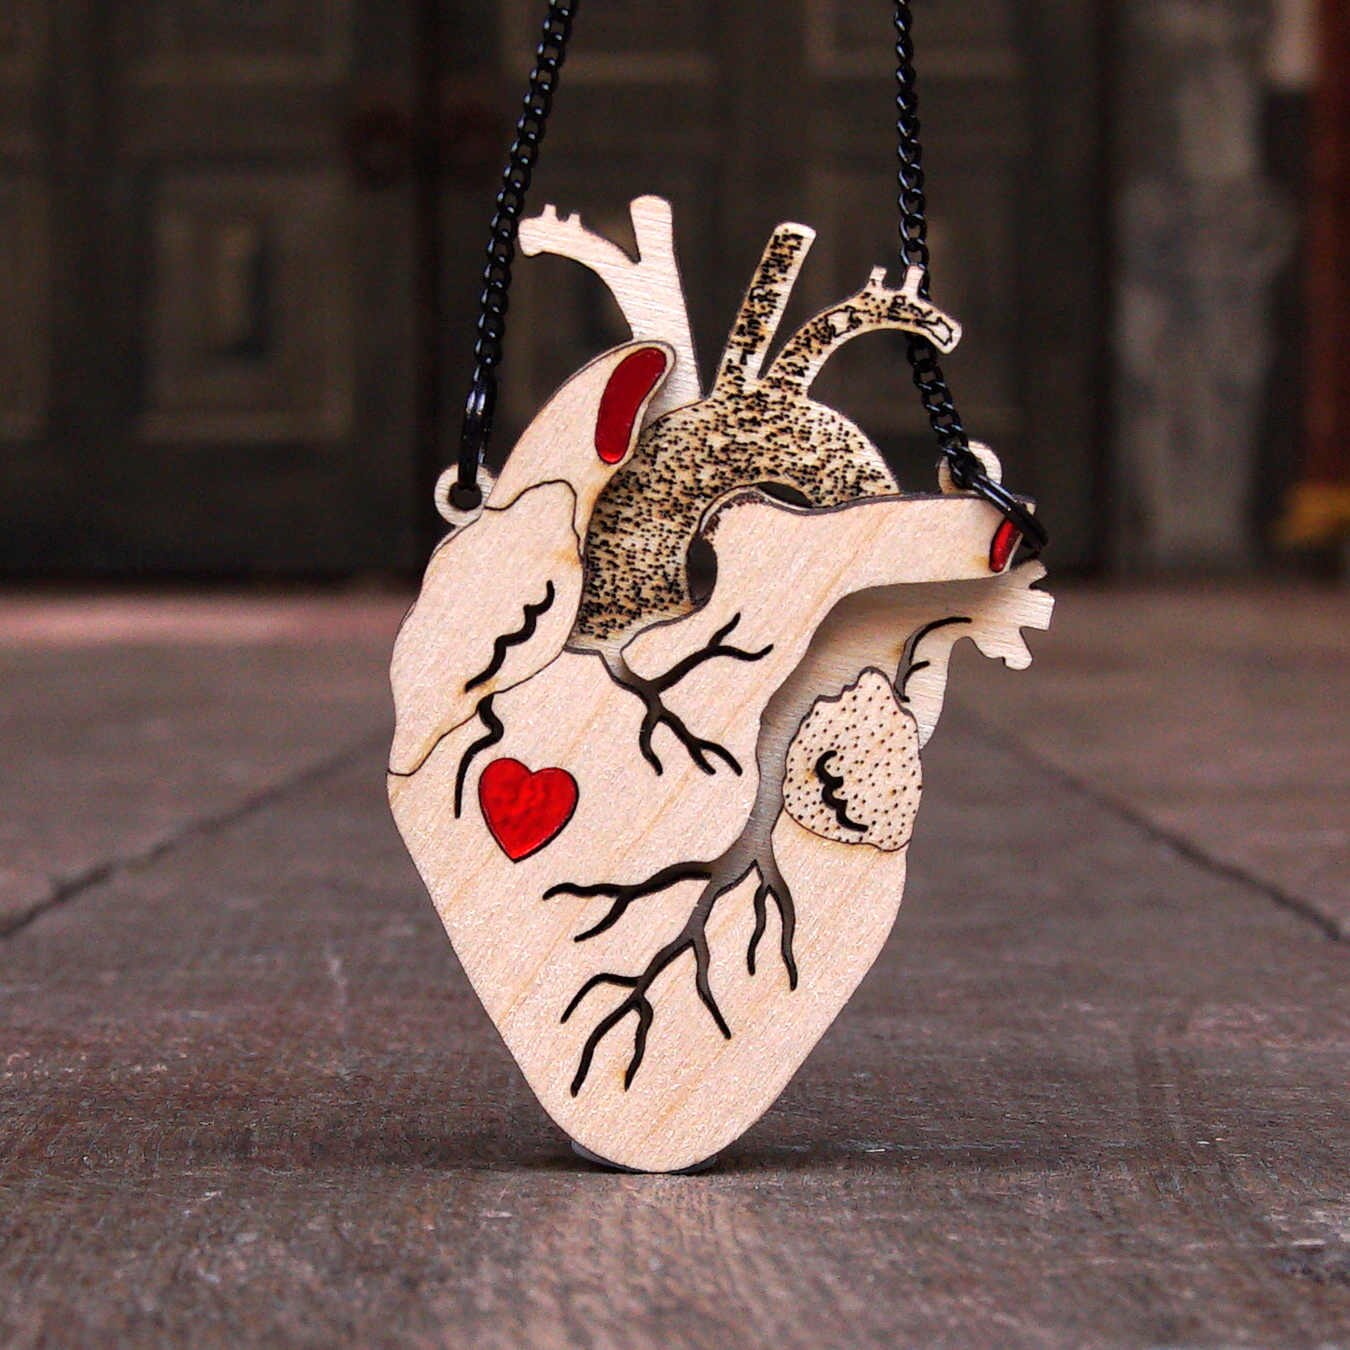 
                  
                    Pendant in the shape of an anatomical heart. The pendant is made of birch wood in several layers, giving the appearance of three dimensions. The top layer has channels cut to represent veins and the under layers are textured. A cutout in the shape of a graphic heart sits about halfway down the pendant and is filled in with bright red Perspex. the pendant is on a black chain.
                  
                